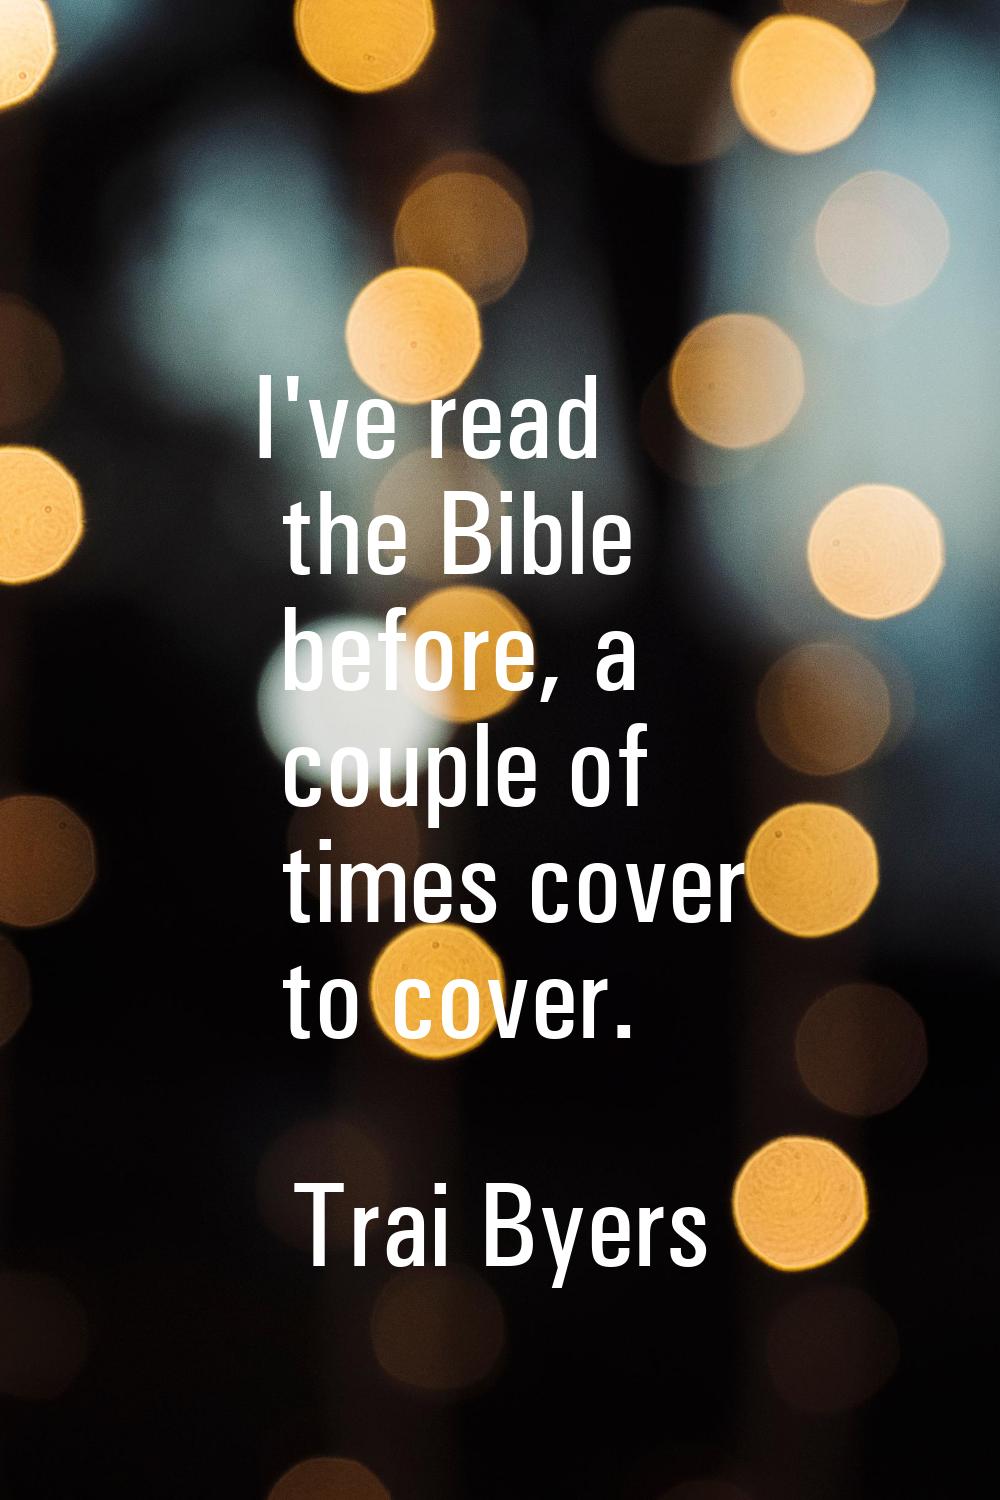 I've read the Bible before, a couple of times cover to cover.